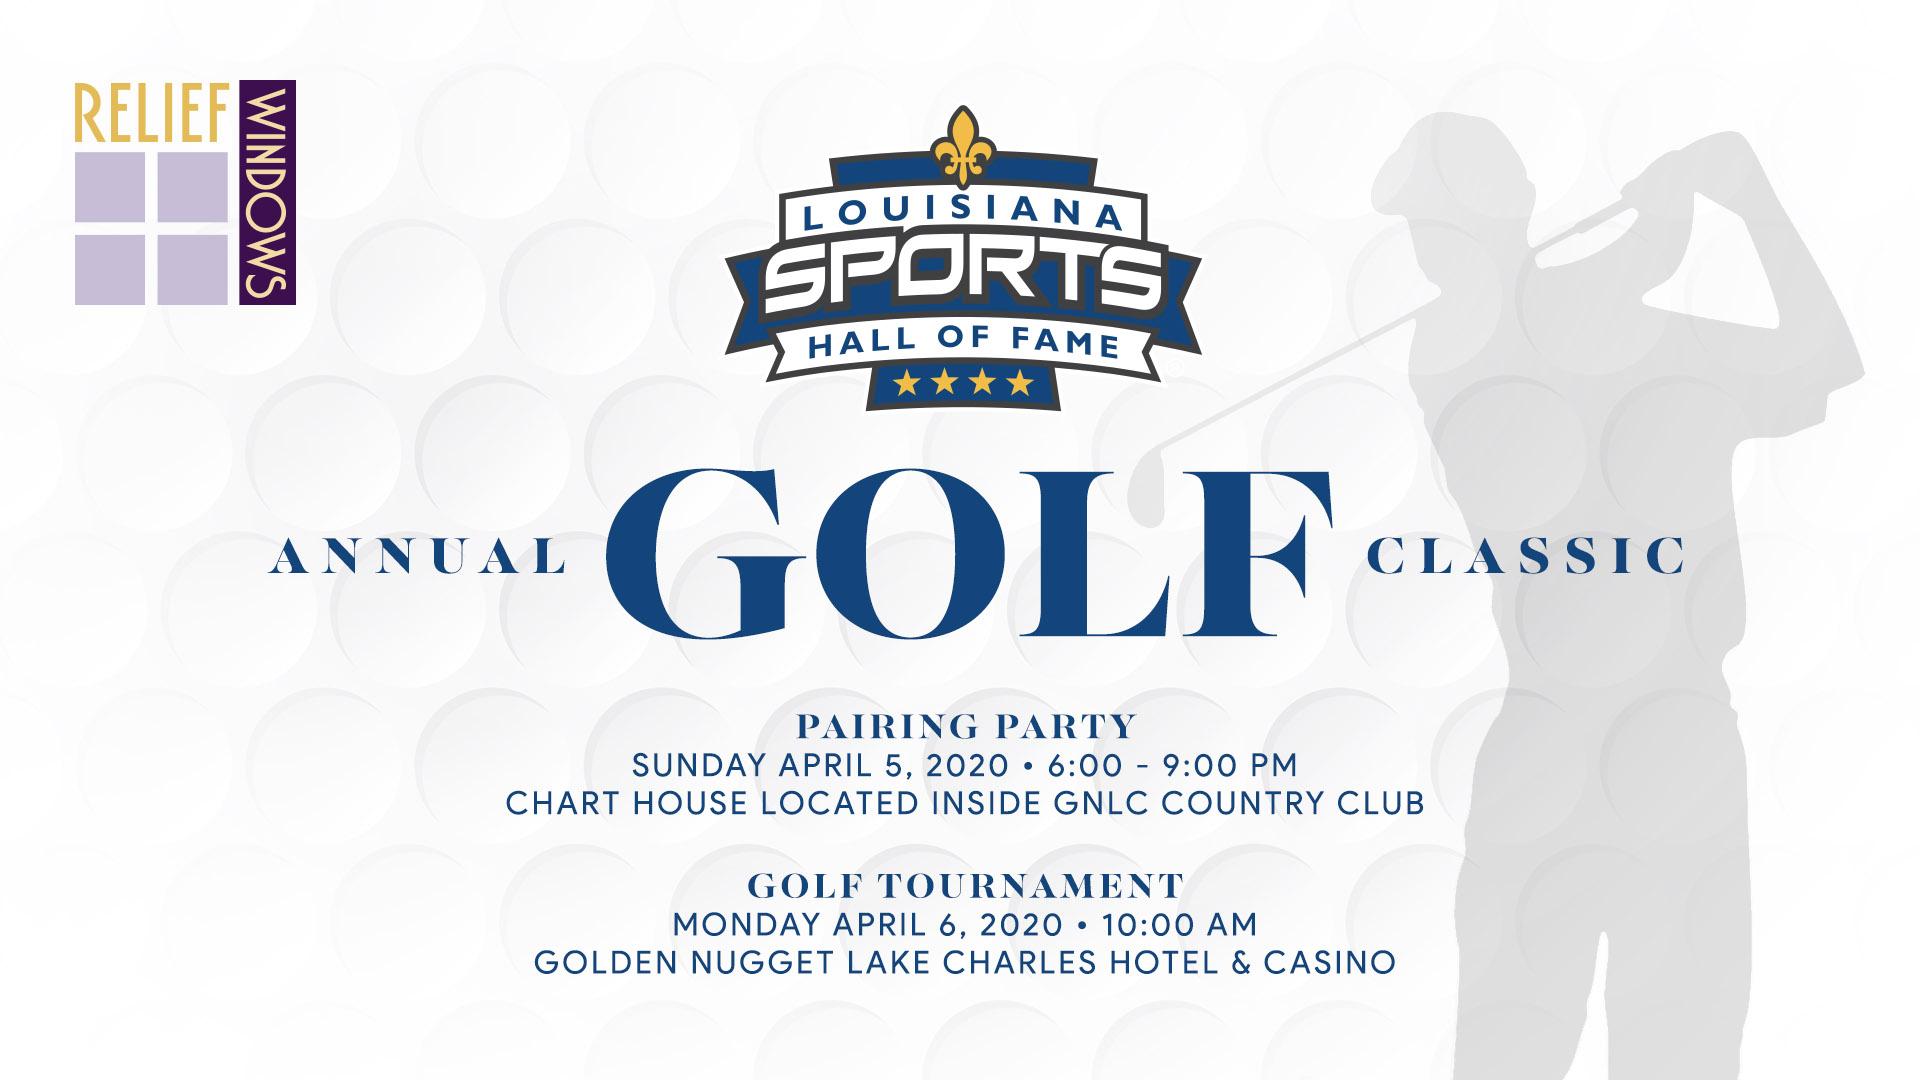 LSHOF Annual Golf Classic presented by Relief Windows